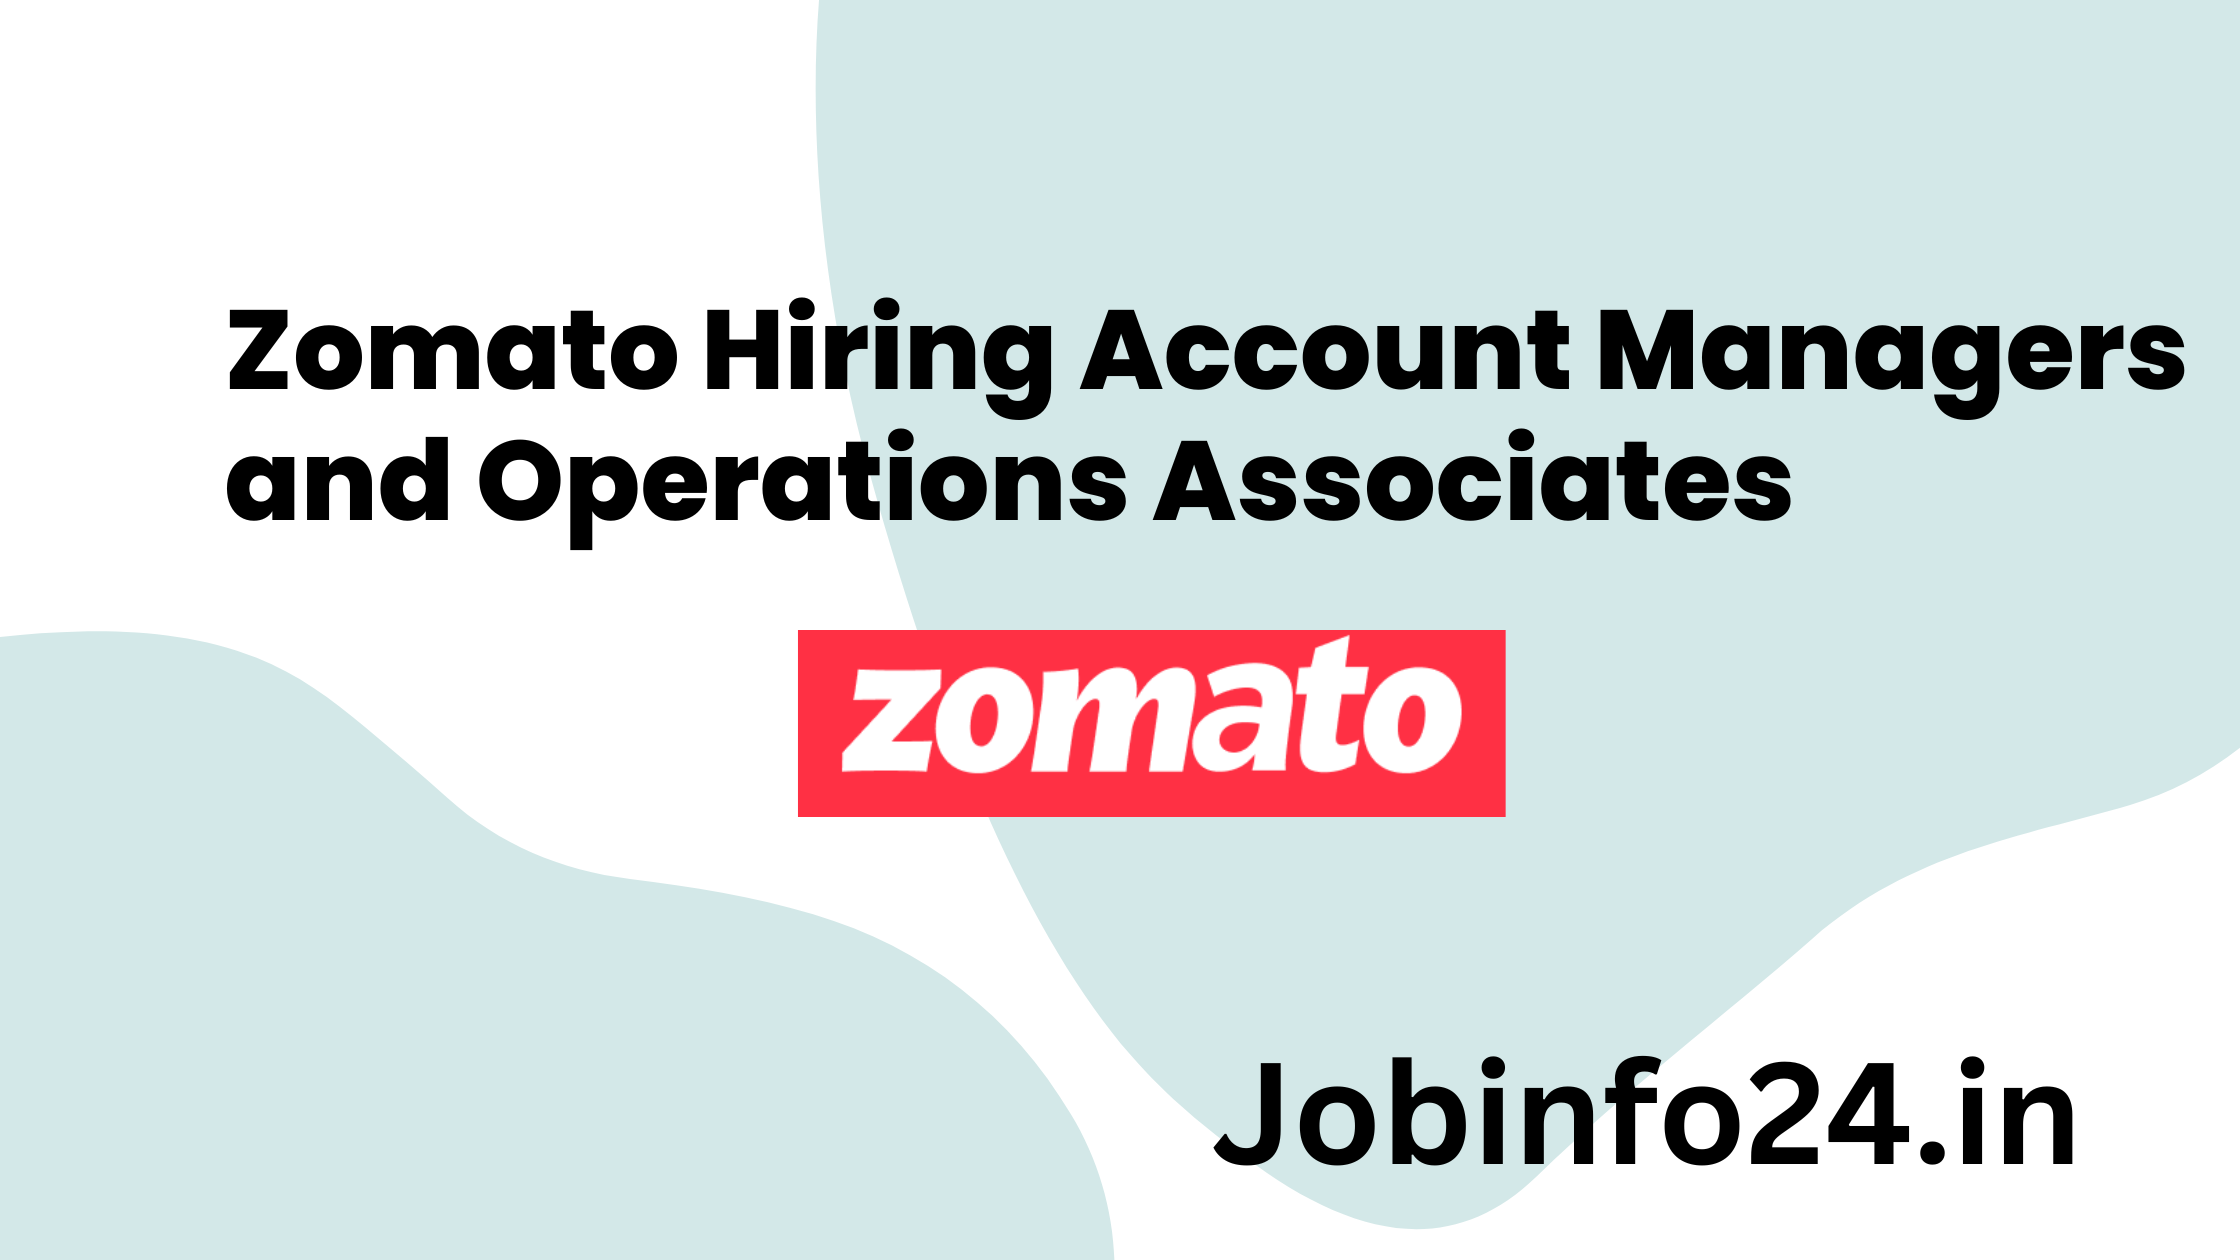 Zomato Hiring Account Managers and Operations Associates